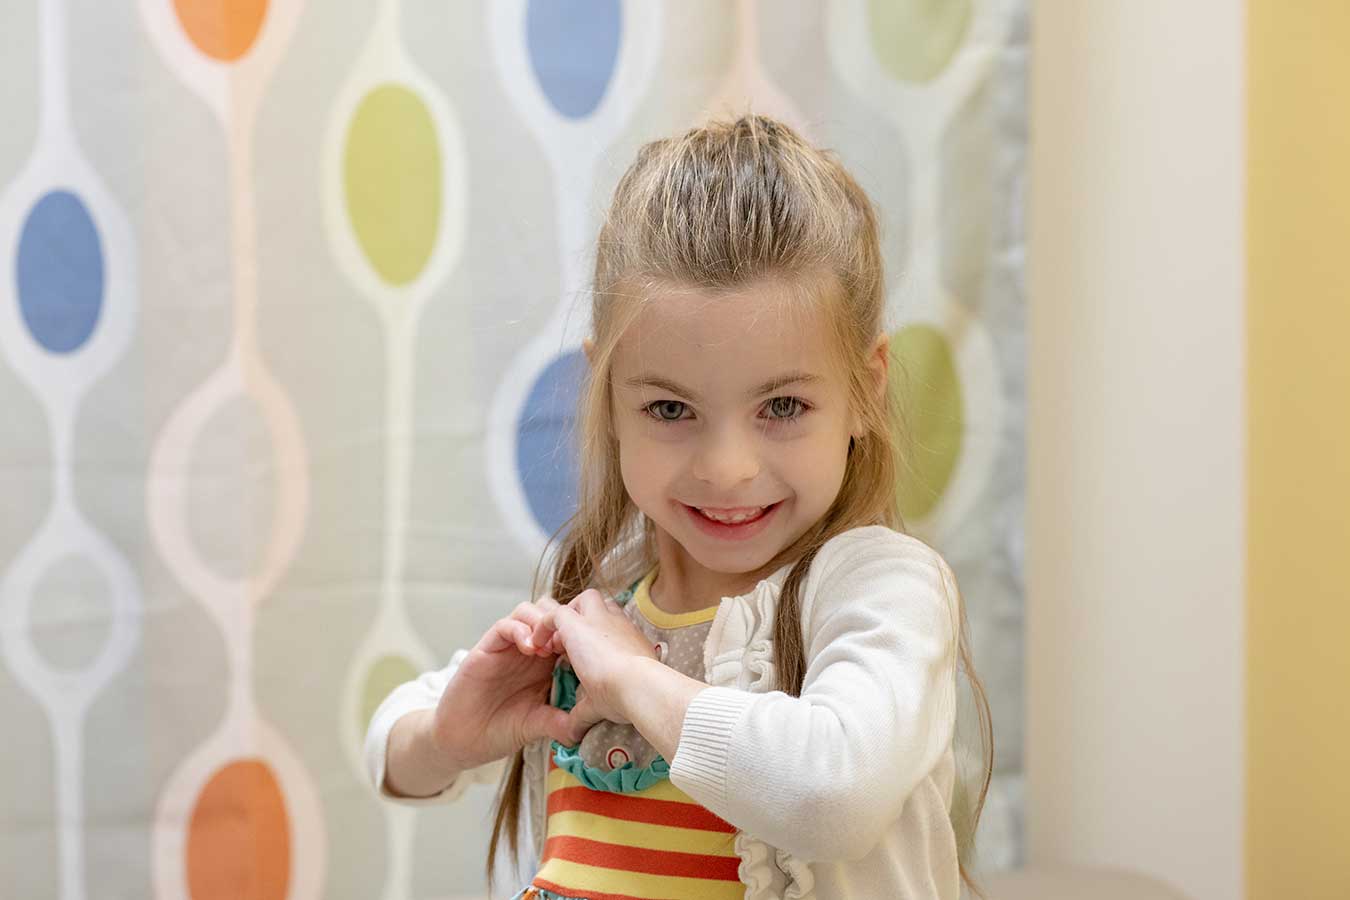 Young girl standing in front of colorful wall makes a heart shape with her hands